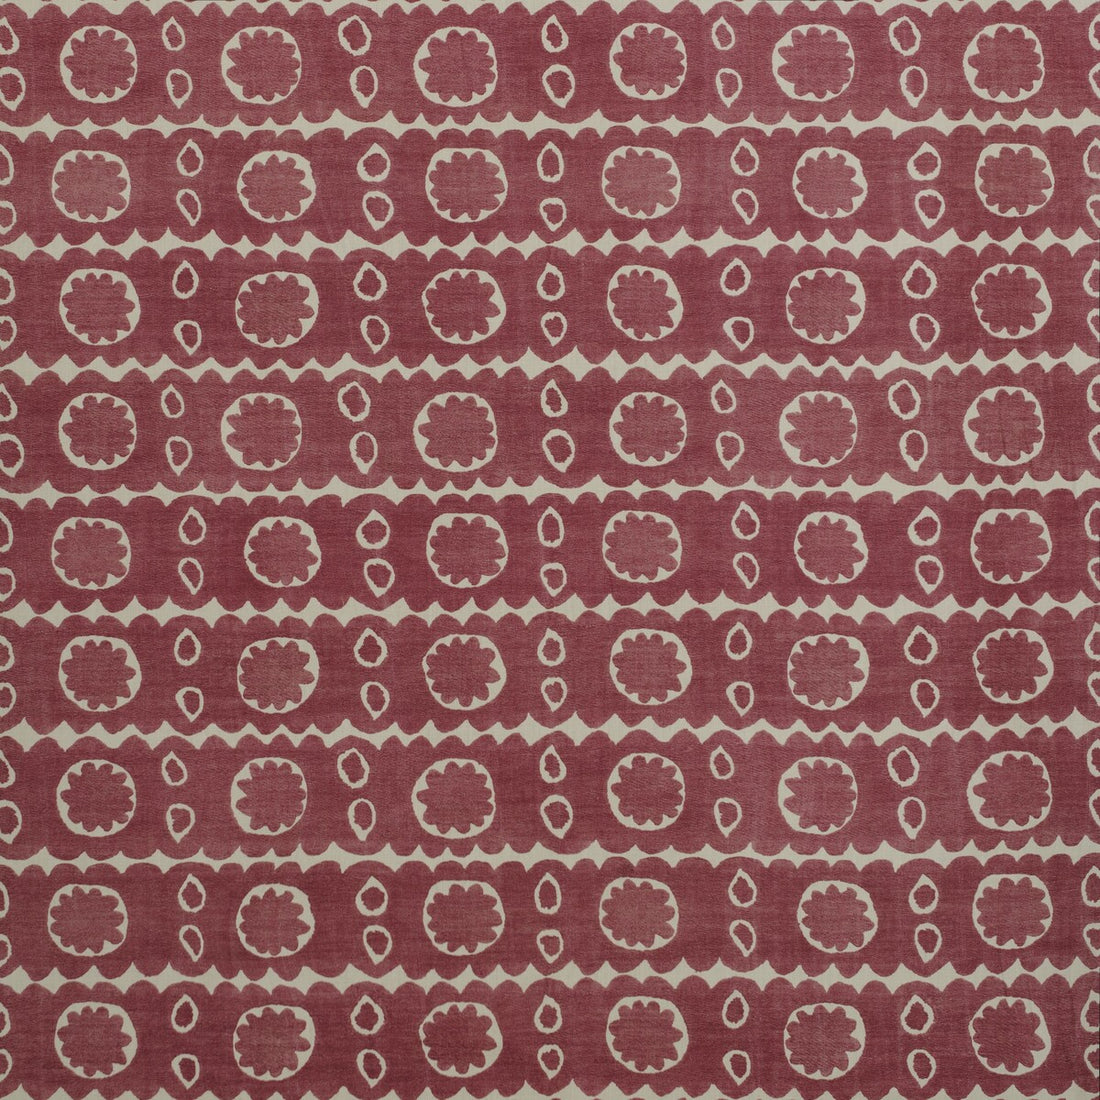 Osborne fabric in red color - pattern BFC-3653.119.0 - by Lee Jofa in the Blithfield collection